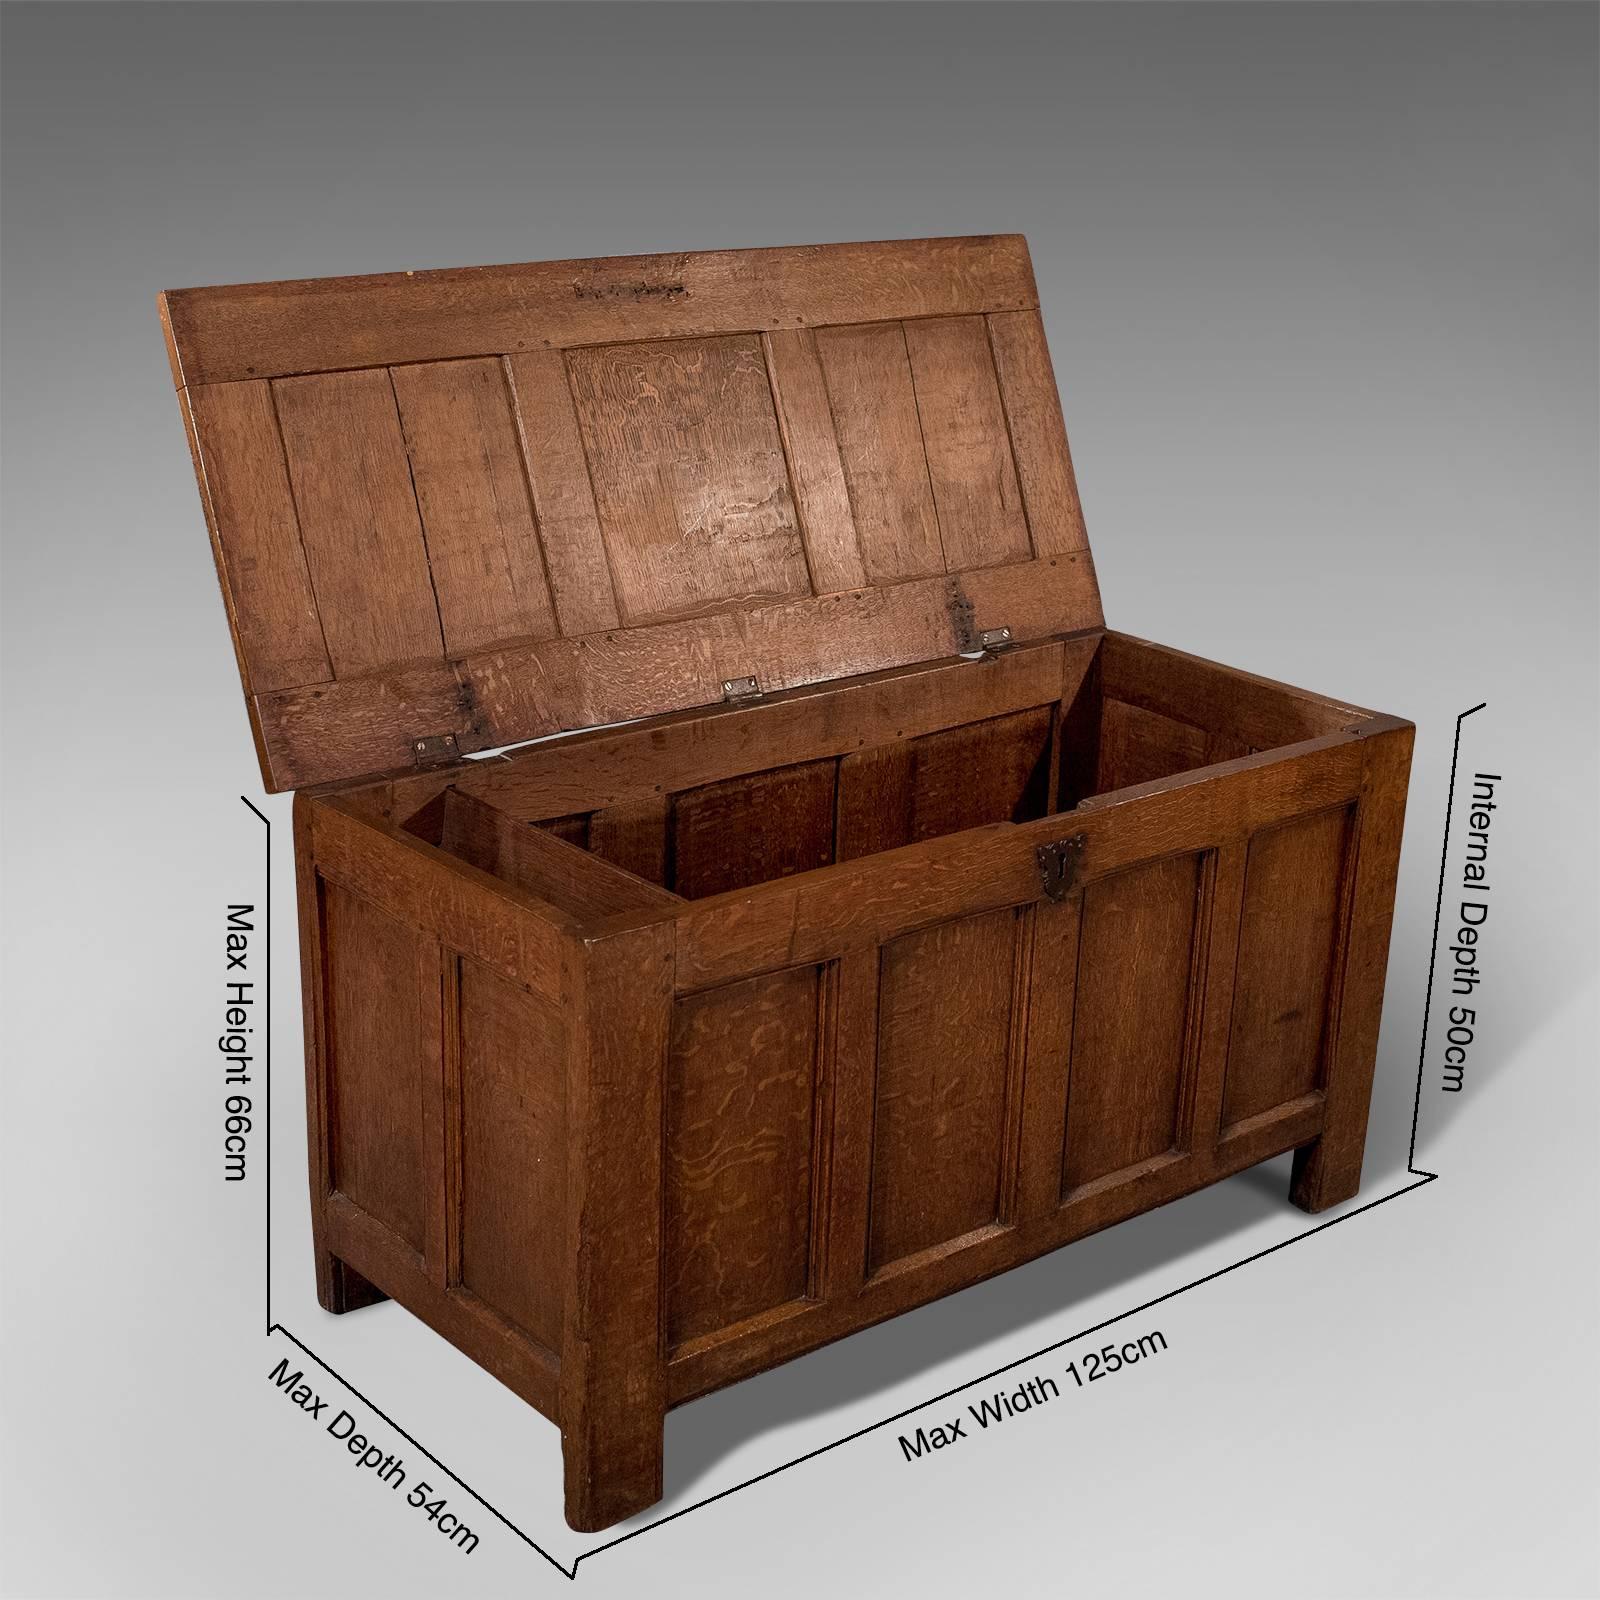 A most pleasing coffer chest presented in good antique condition
Of Classic English mid-Georgian craftsmanship with field panels and pegged mortice joints
Mid-size offering practical storage 
Candle tray to one end
Rising from style legs through